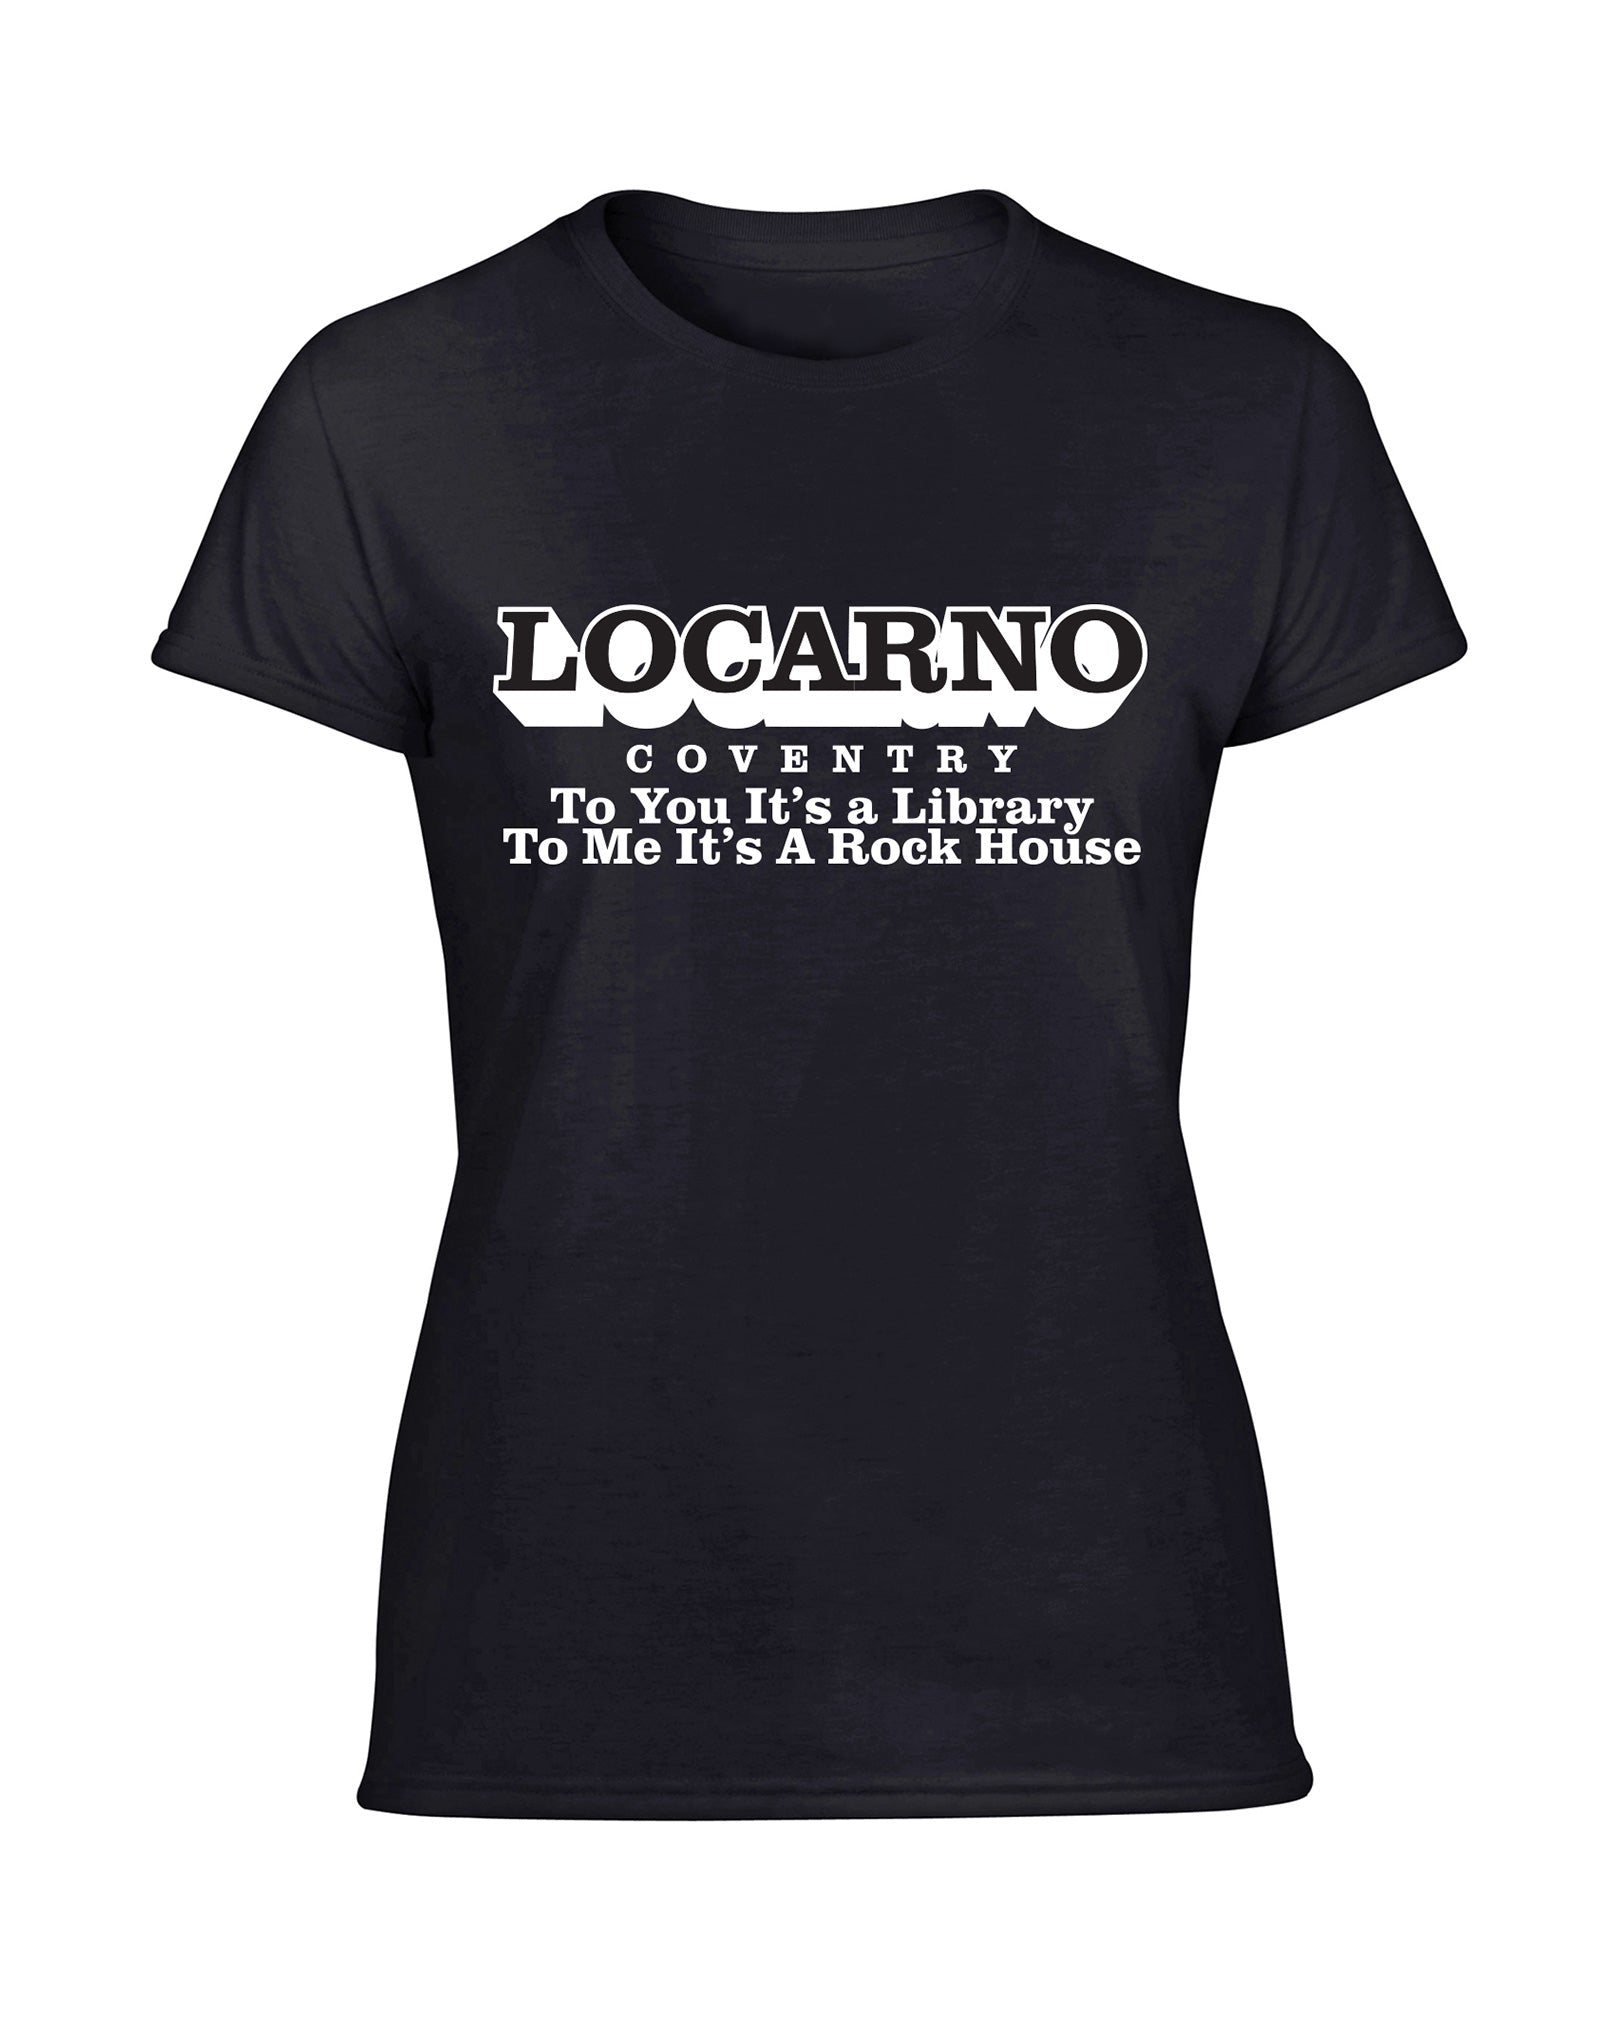 Locarno/Rockhouse - Coventry - ladies fit t-shirt- various colours - Dirty Stop Outs